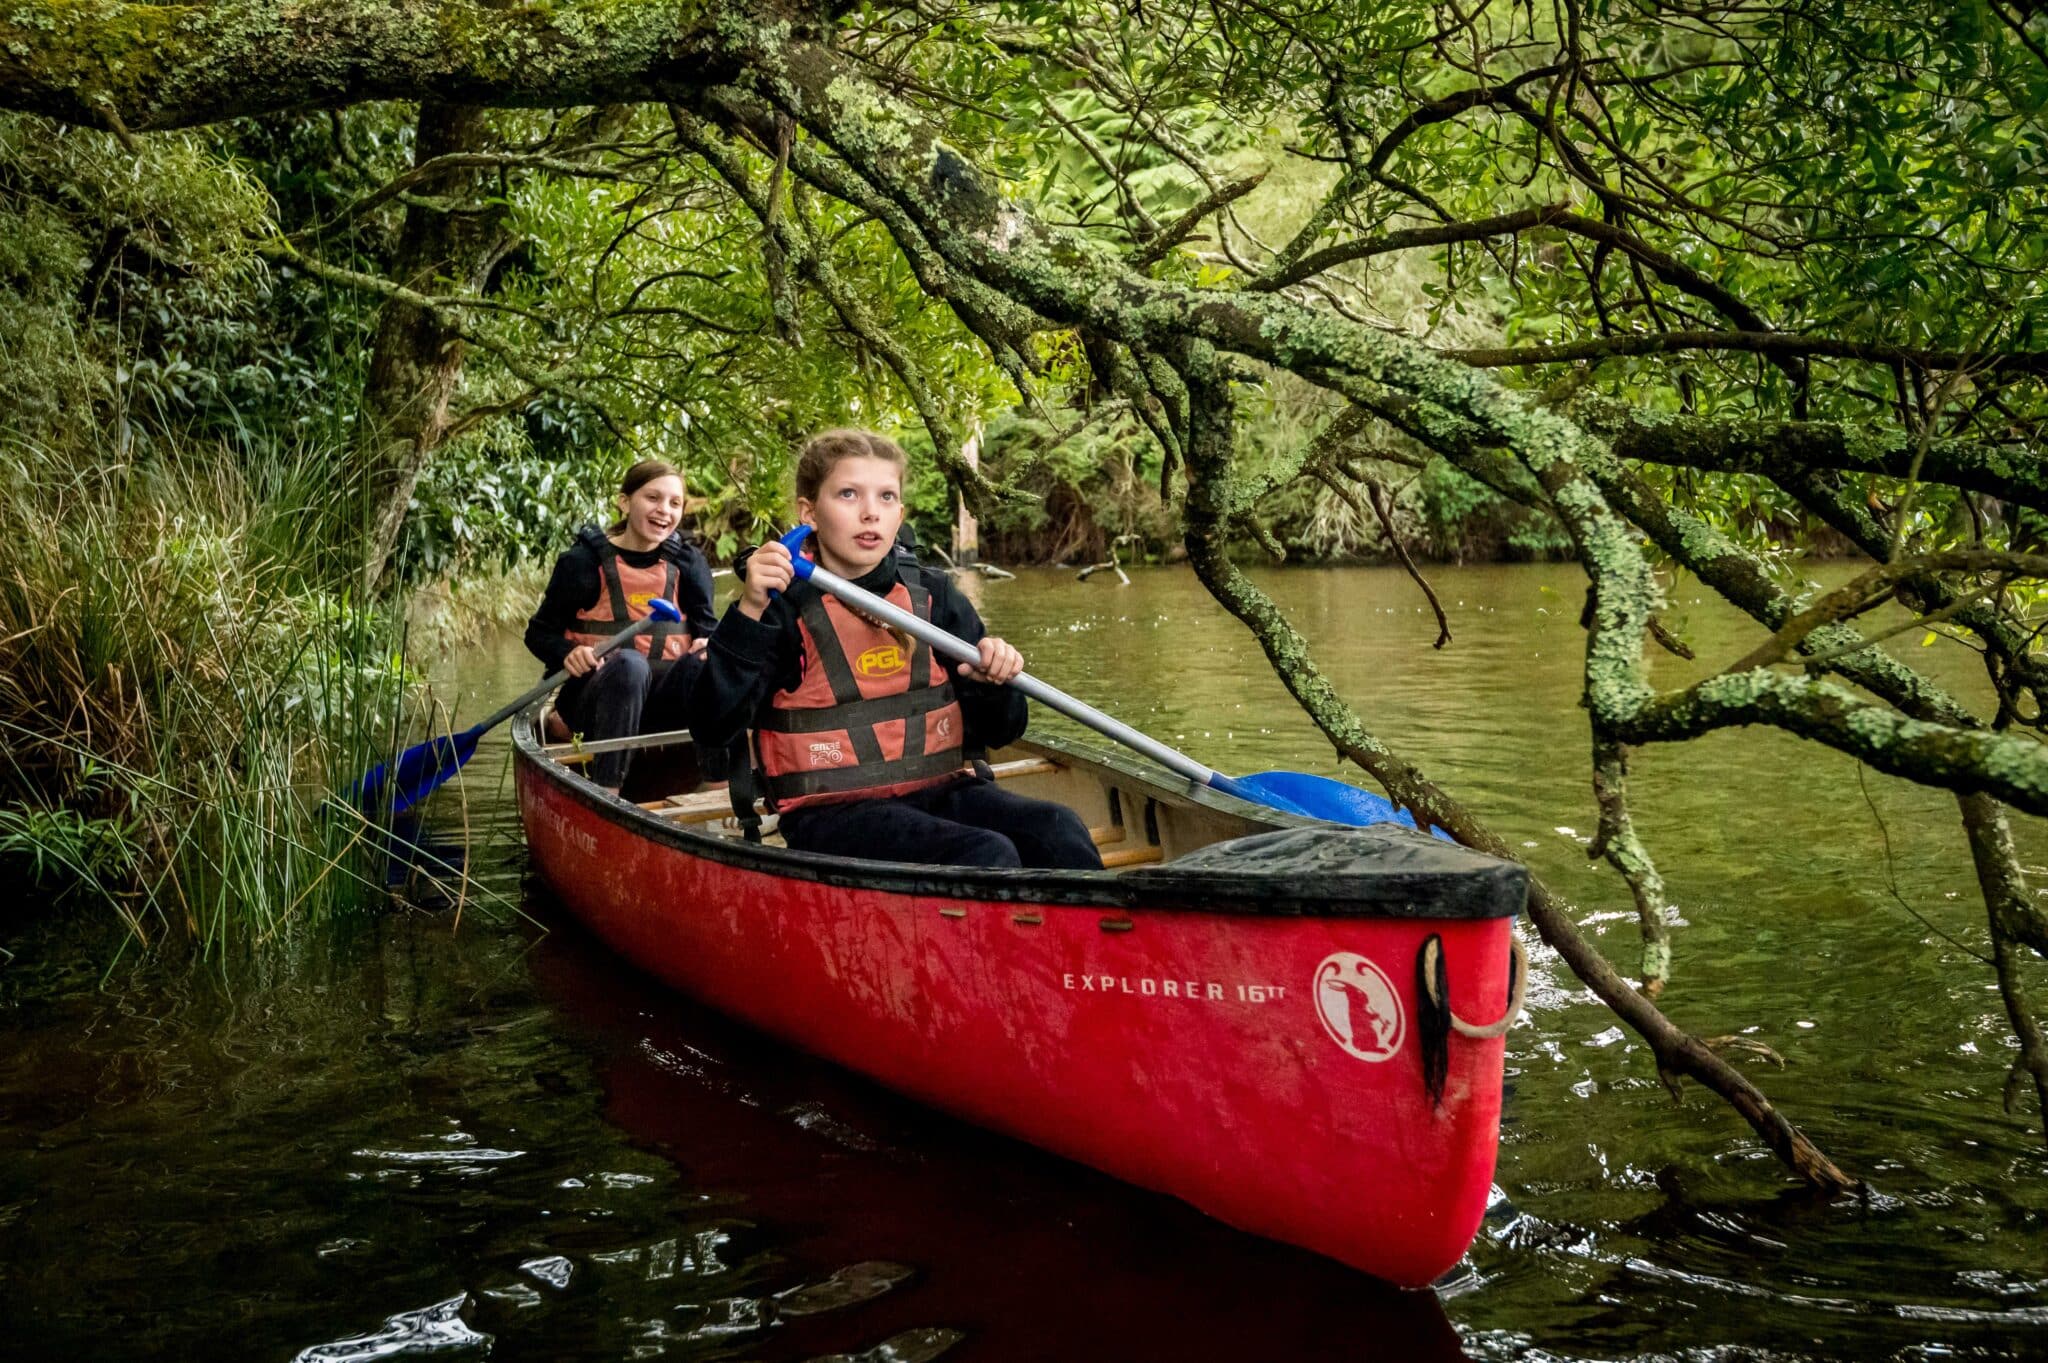 Two people unite in canoeing through a densely wooded area, navigating under low-hanging branches on a serene waterway.